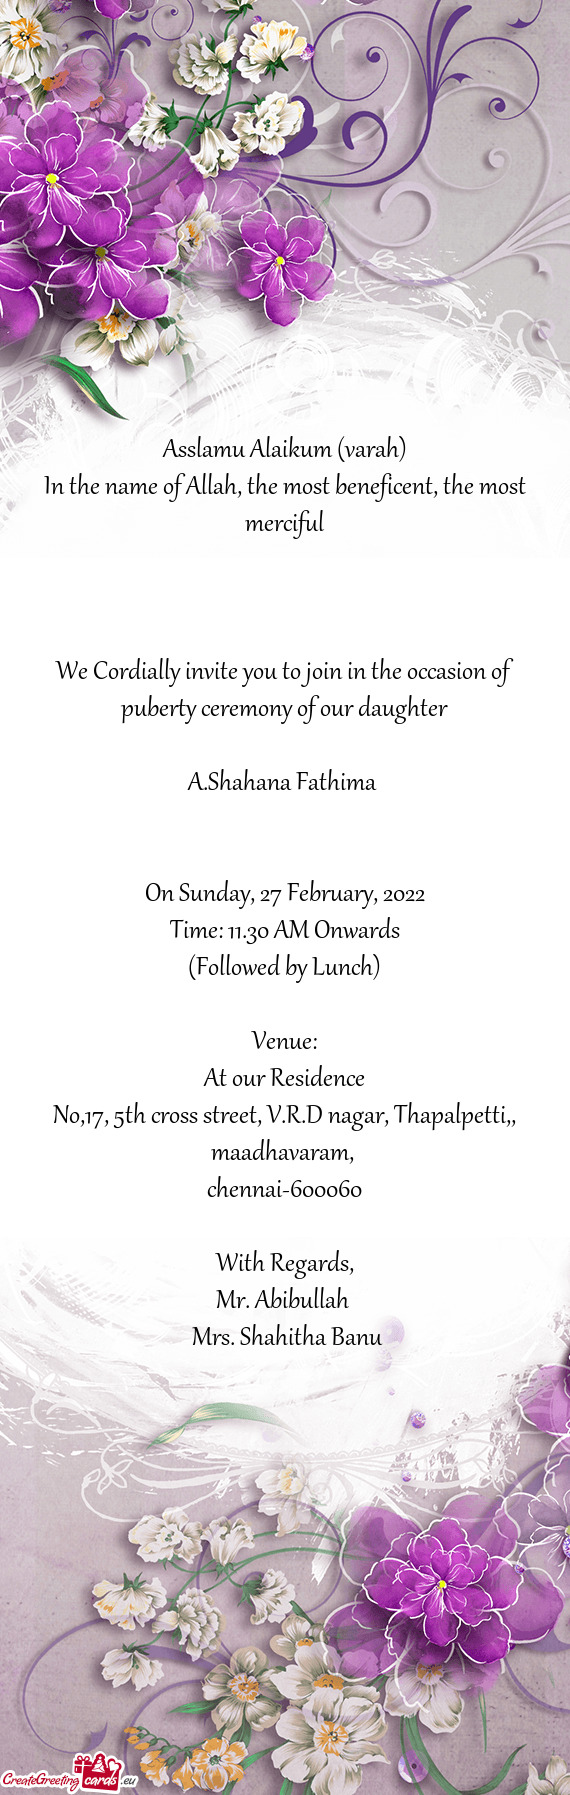 We Cordially invite you to join in the occasion of puberty ceremony of our daughter